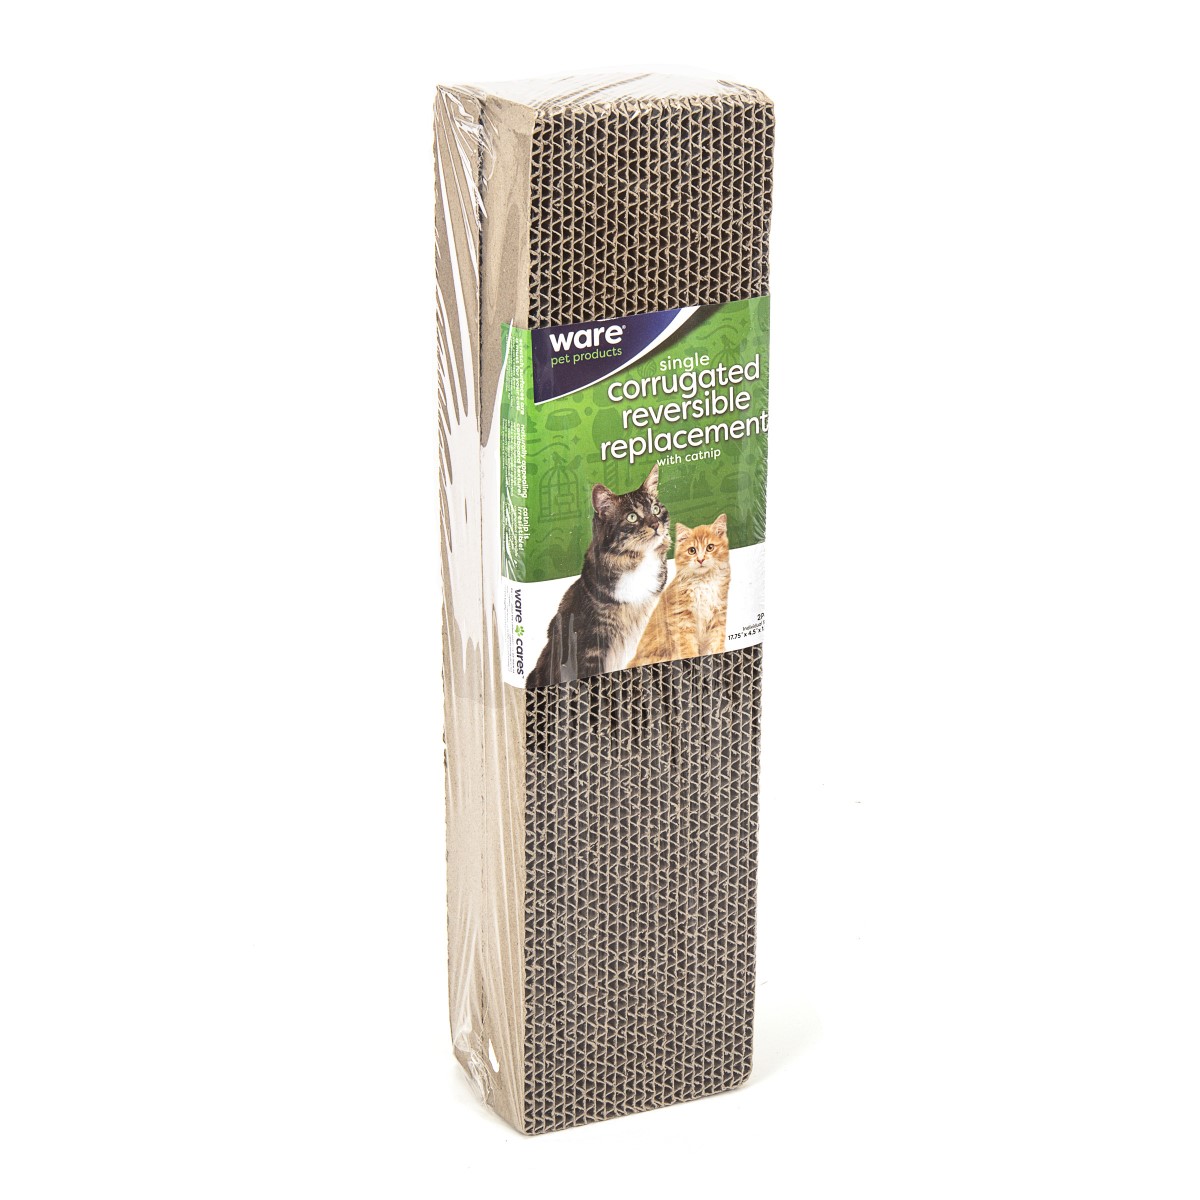 Ware Reversible Replacement Scratcher, Single